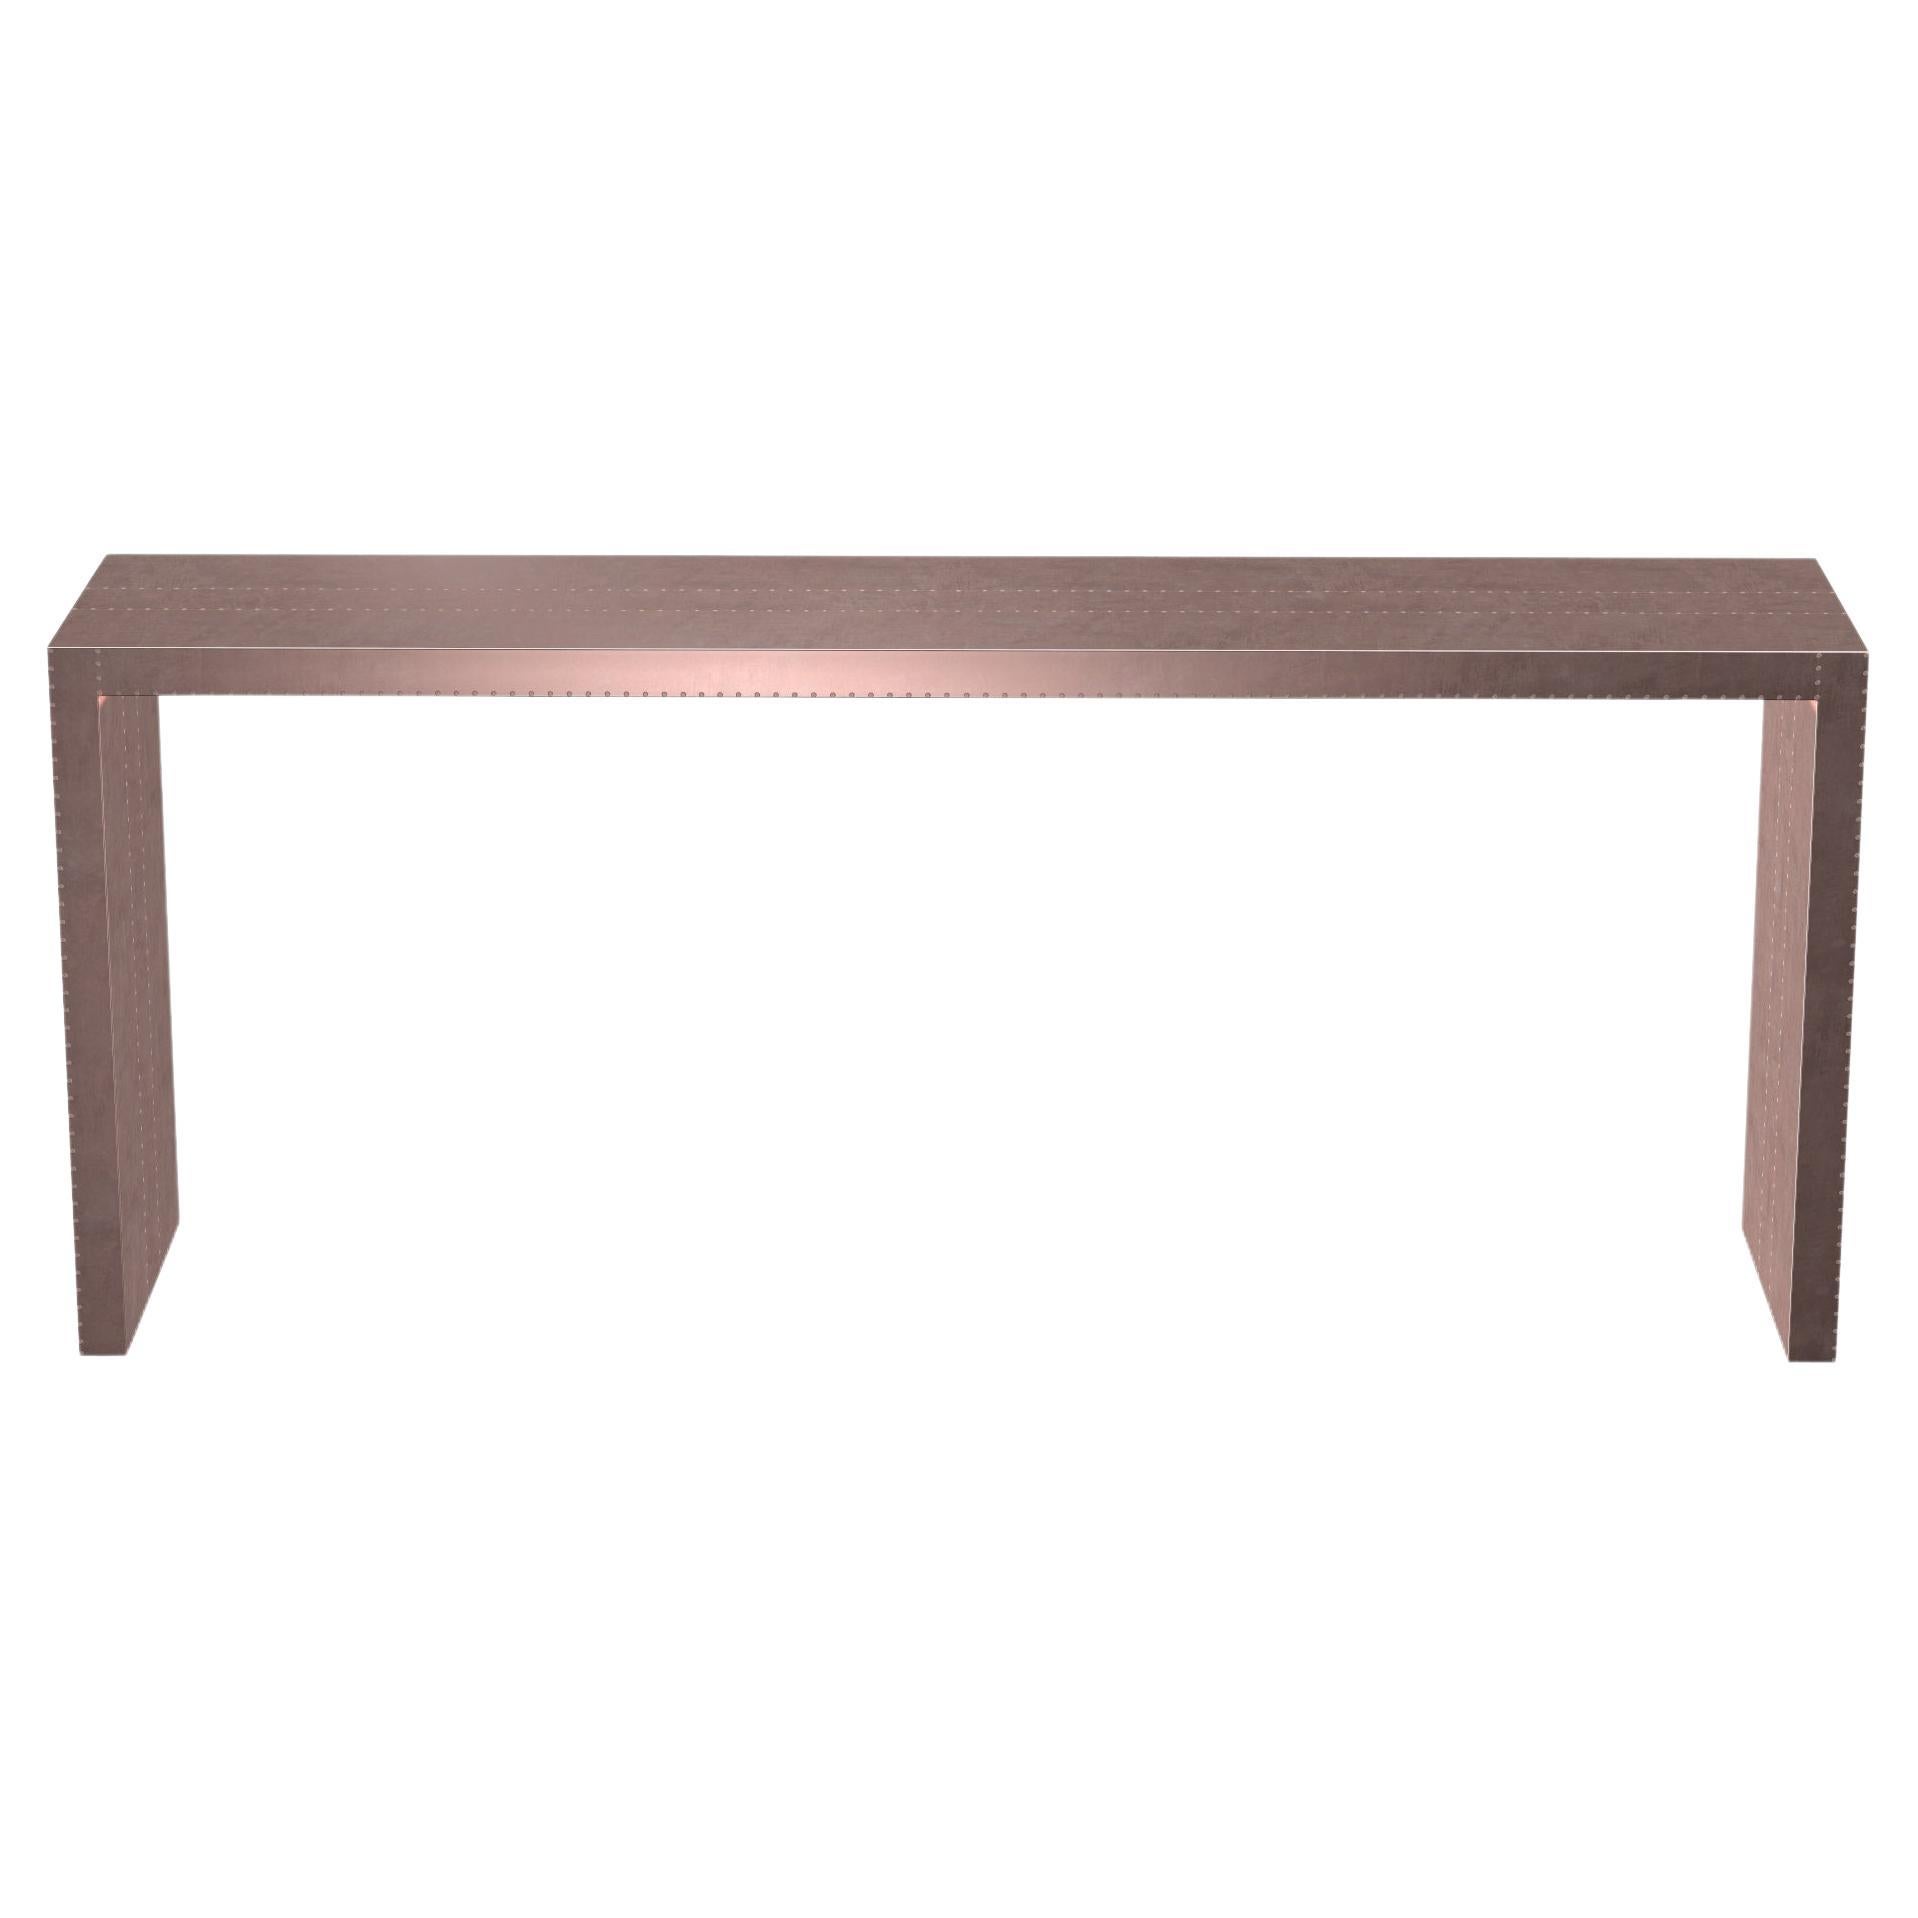 Art Deco Conference Tables Rectangular Console in Smooth Copper by Alison Spear